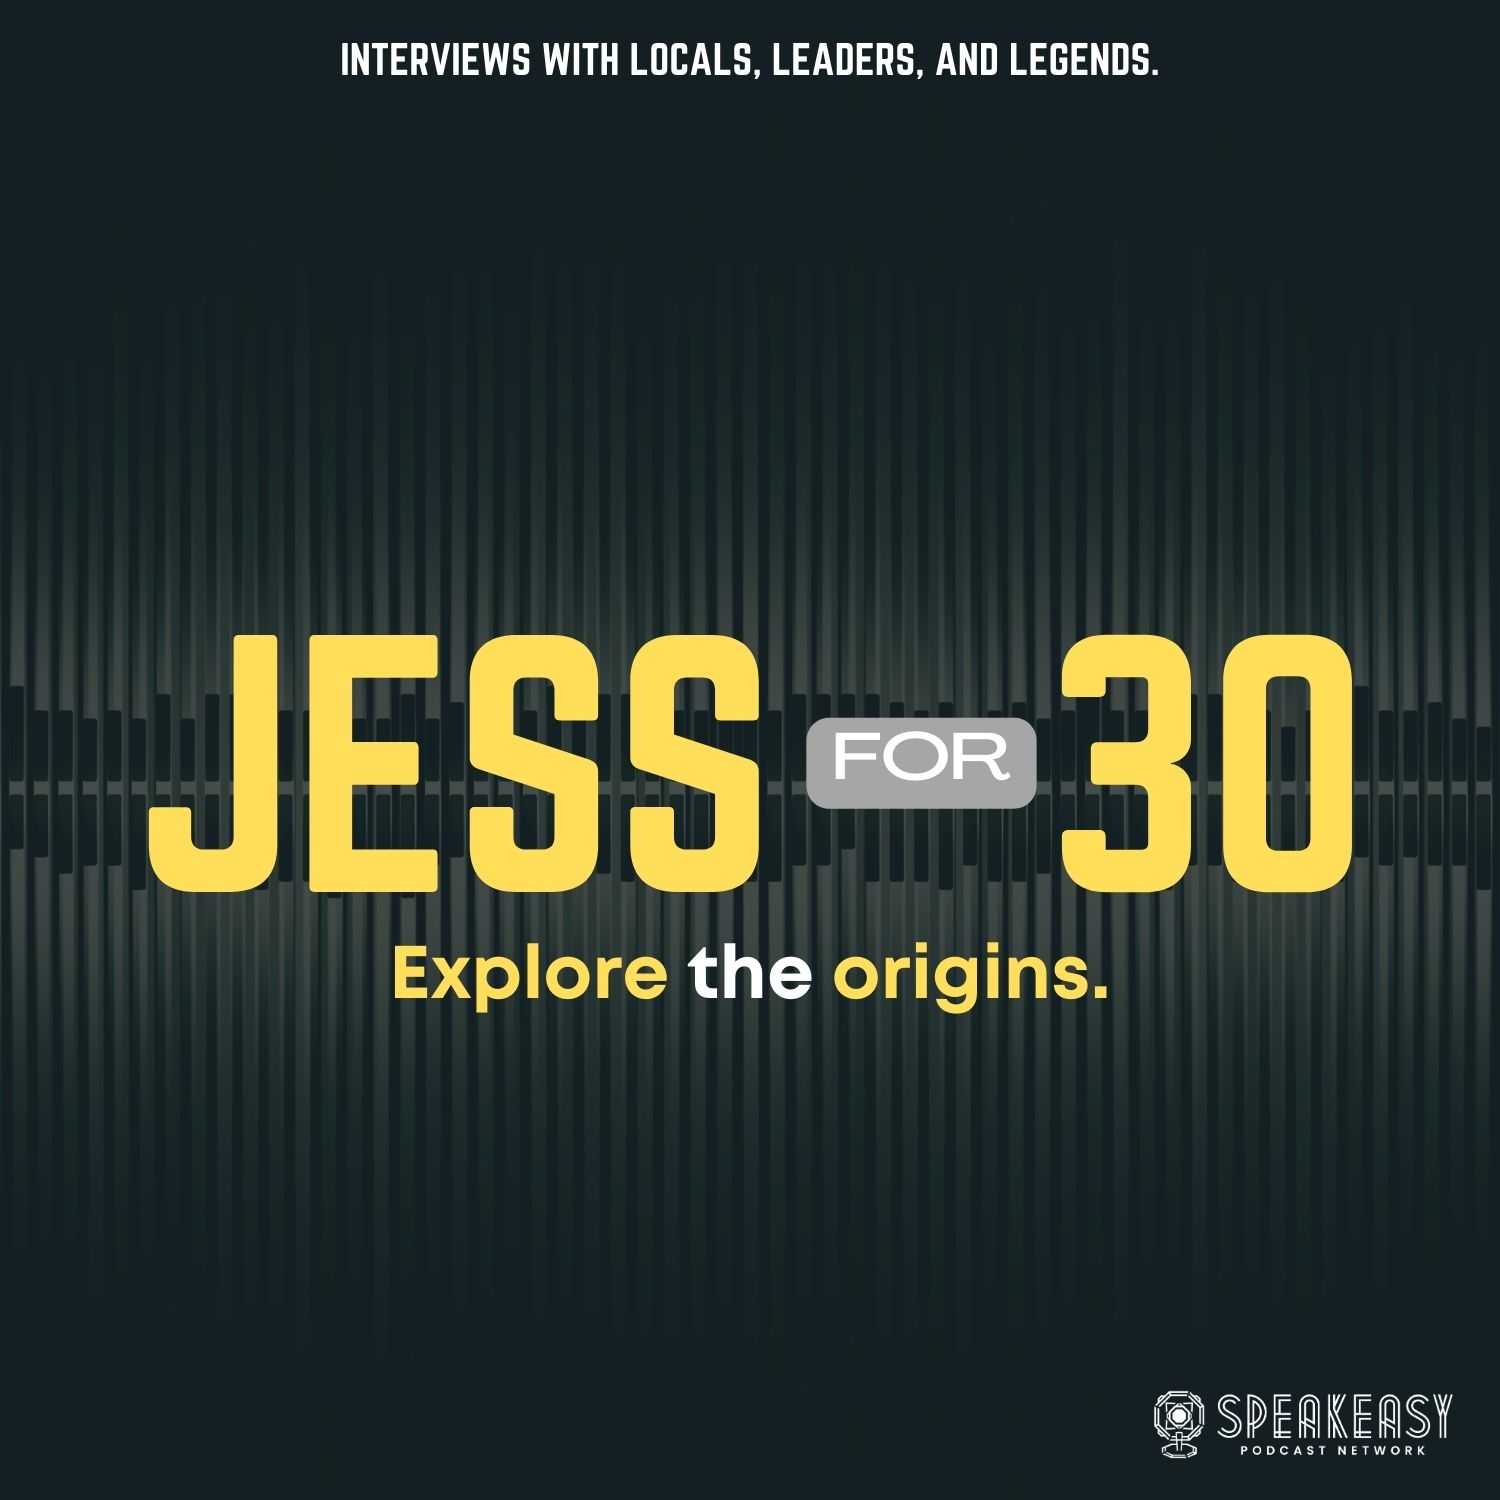 Jess for 30